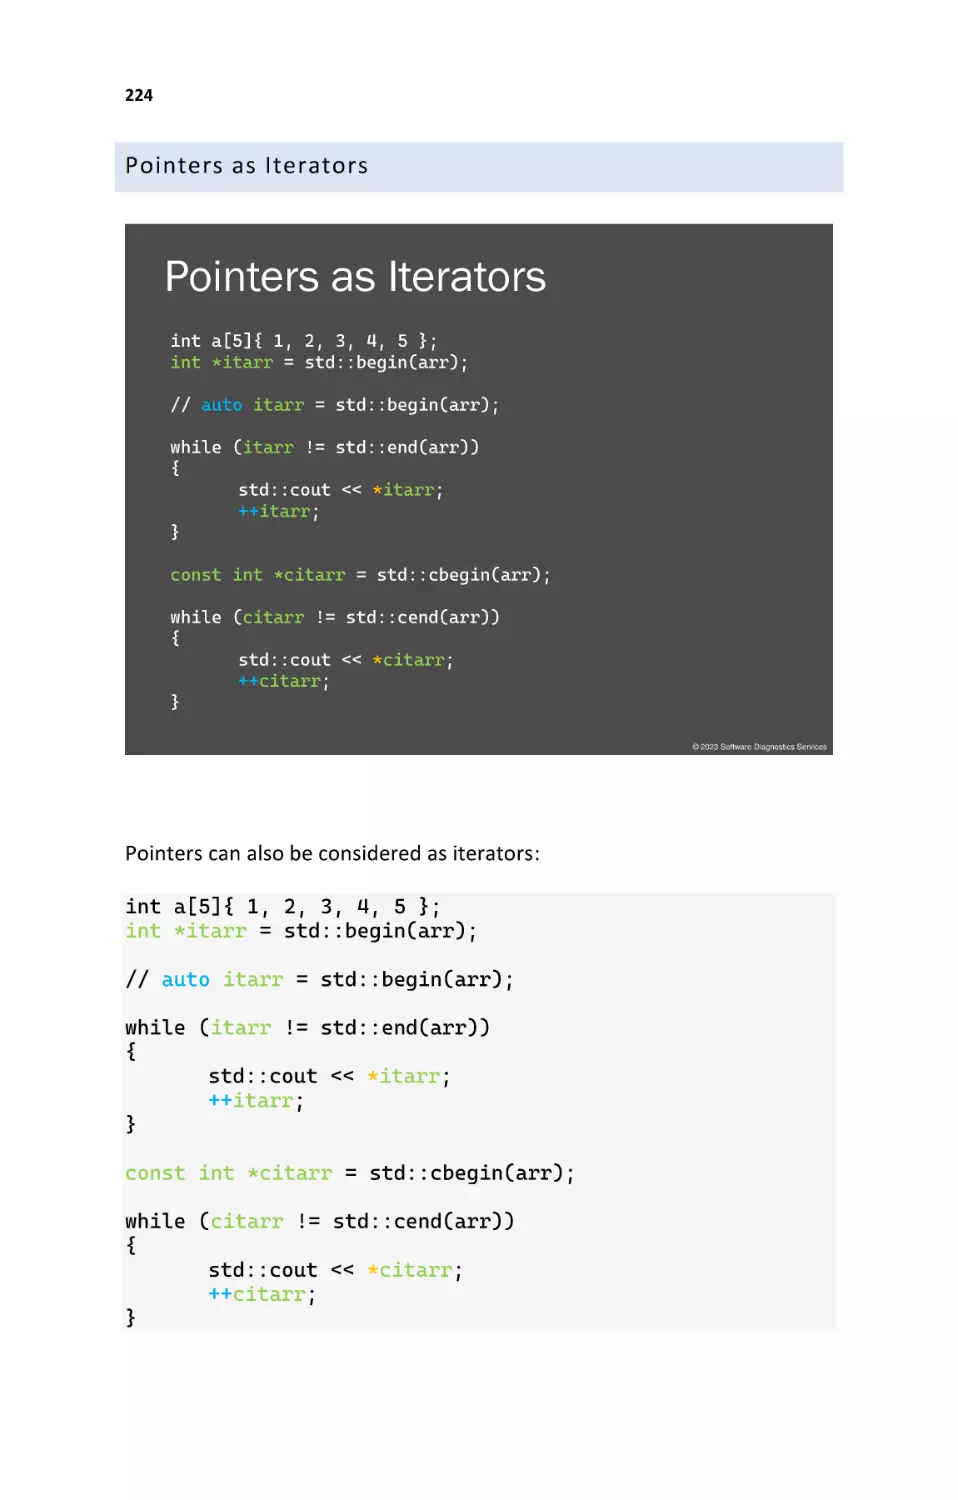 Pointers as Iterators